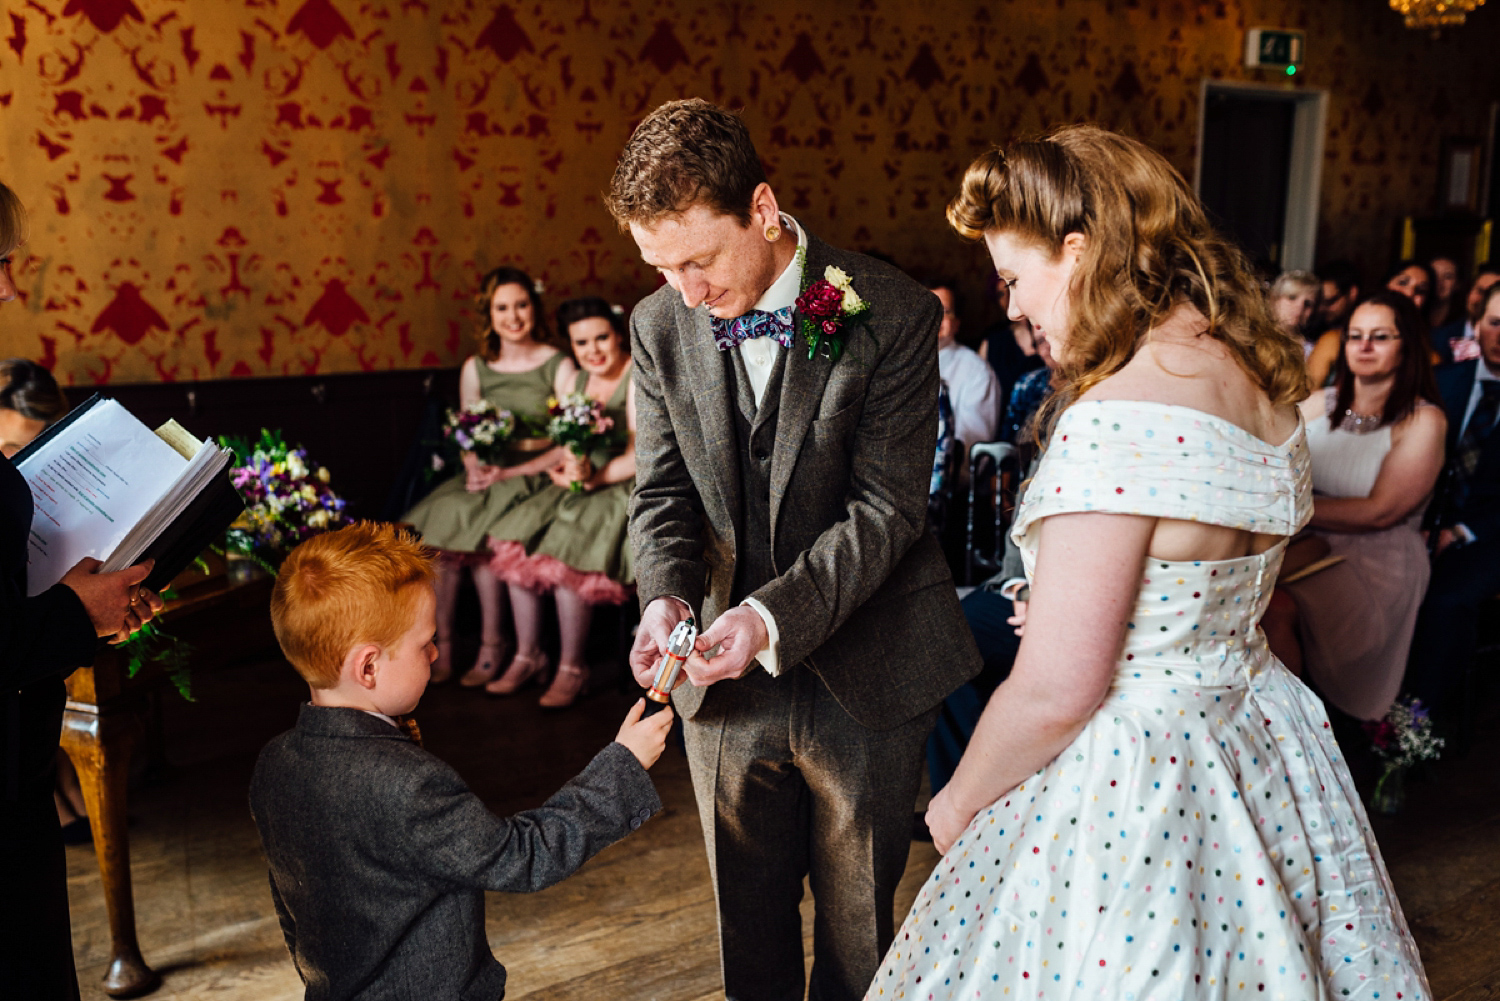 Bride Frankie wore a 1950's inspired, colourful polka dot dress by 'Oh My Honey' for her geek-chic and reto inspired wedding. Photography by Anna Pumer.